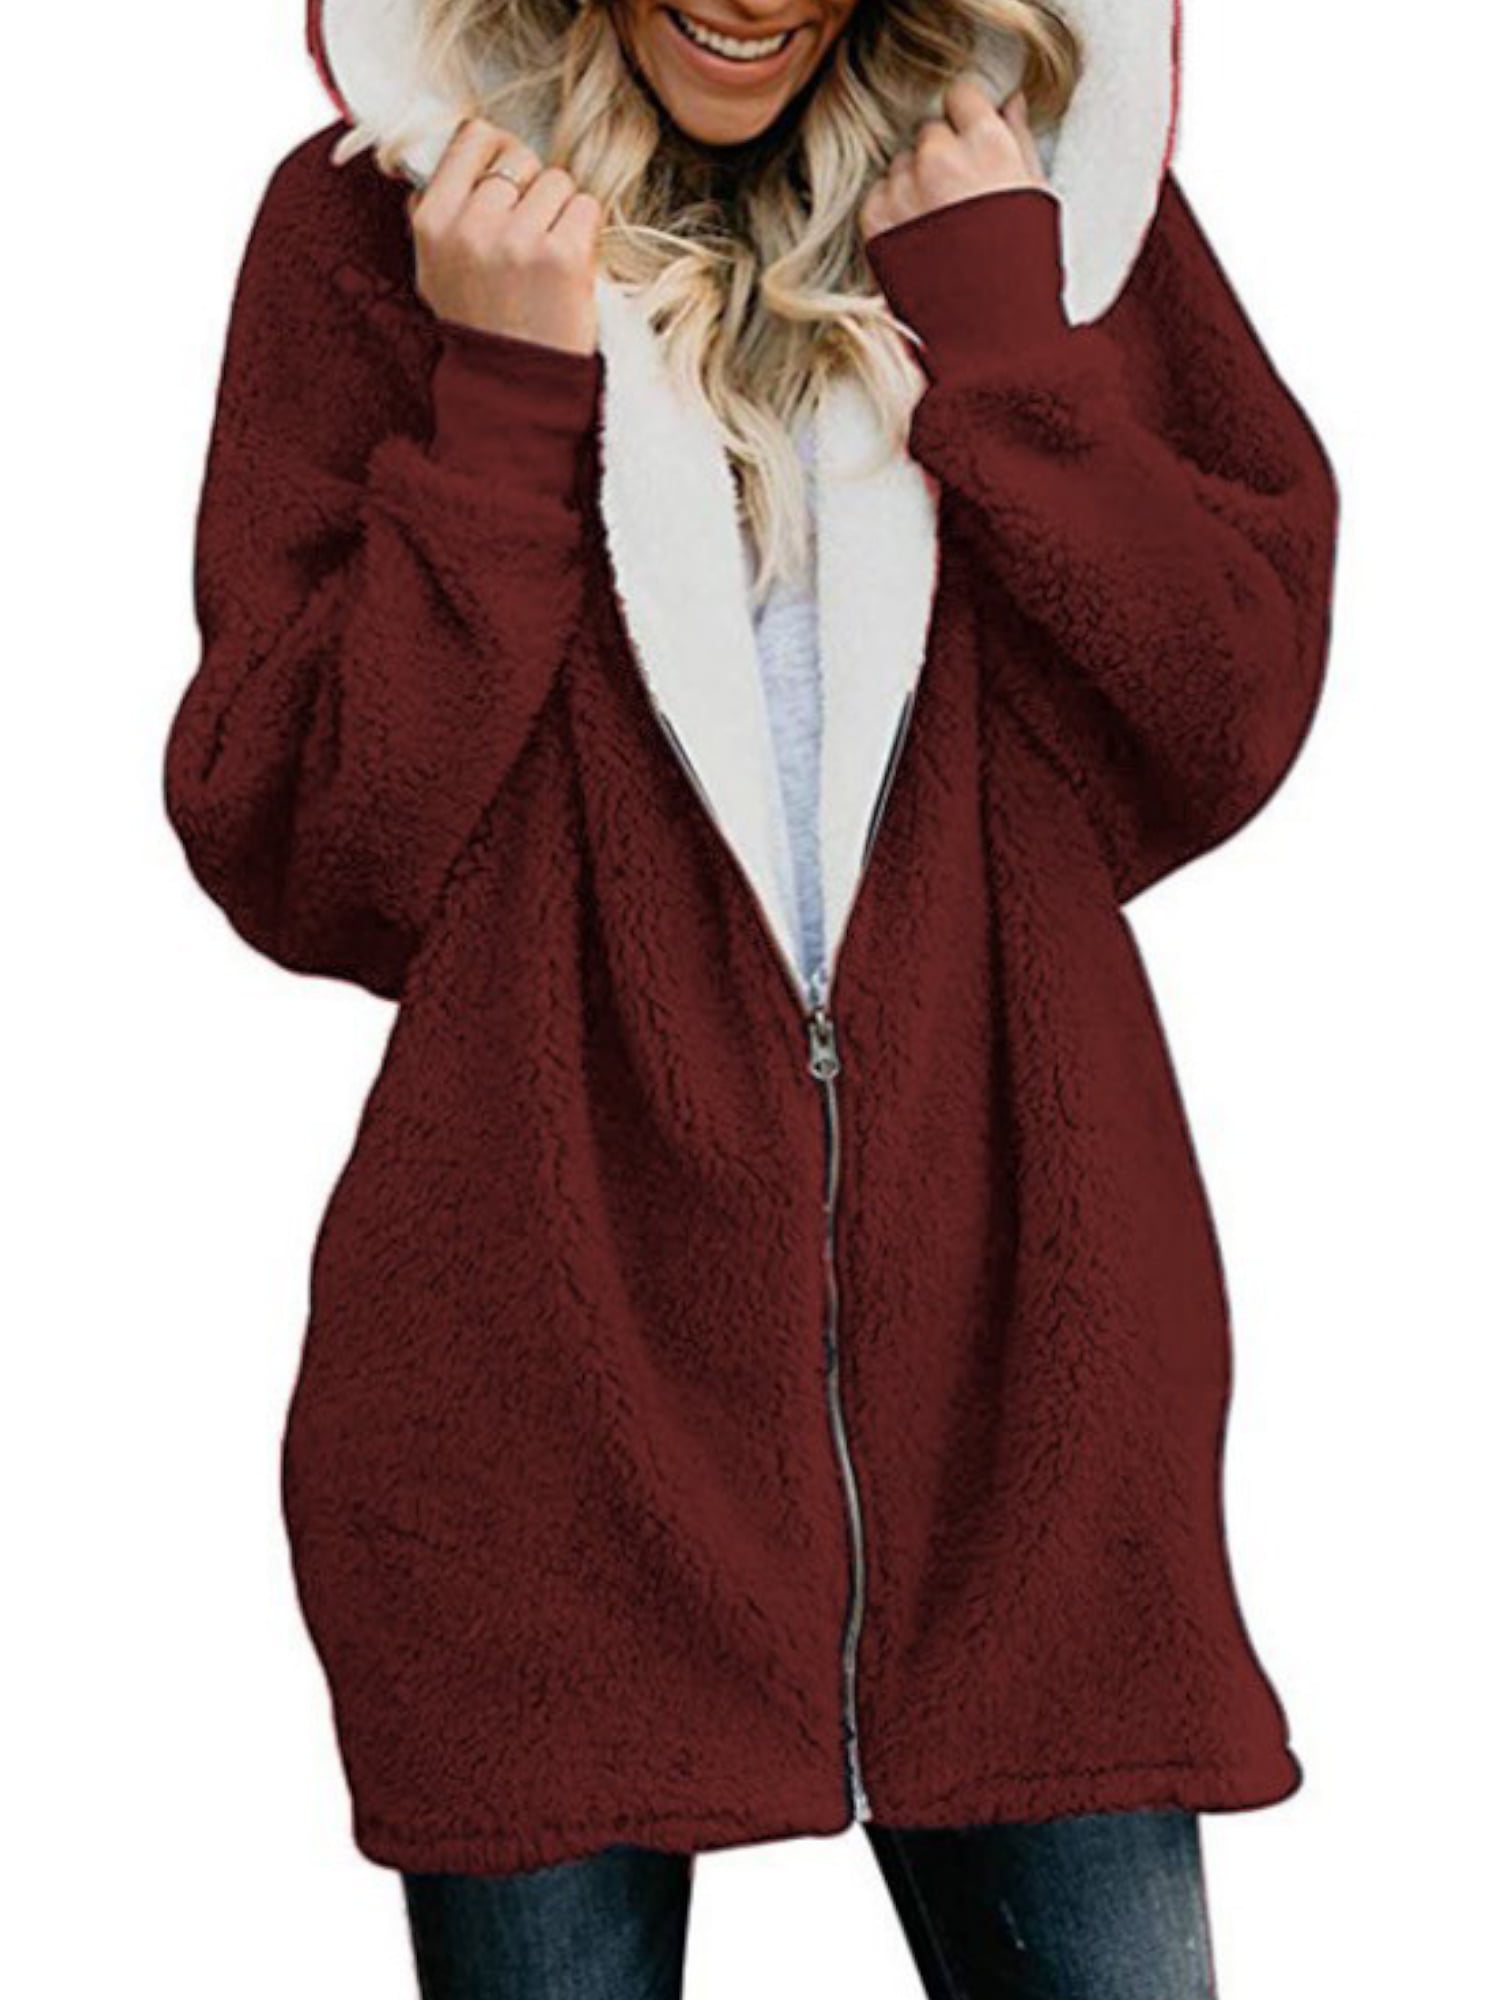 Full Zip Coat for Women Plus Size Plush Hooded Jacket Casual Color Block Long Sleeve Faux Fur Outerwear Winter Clothes 